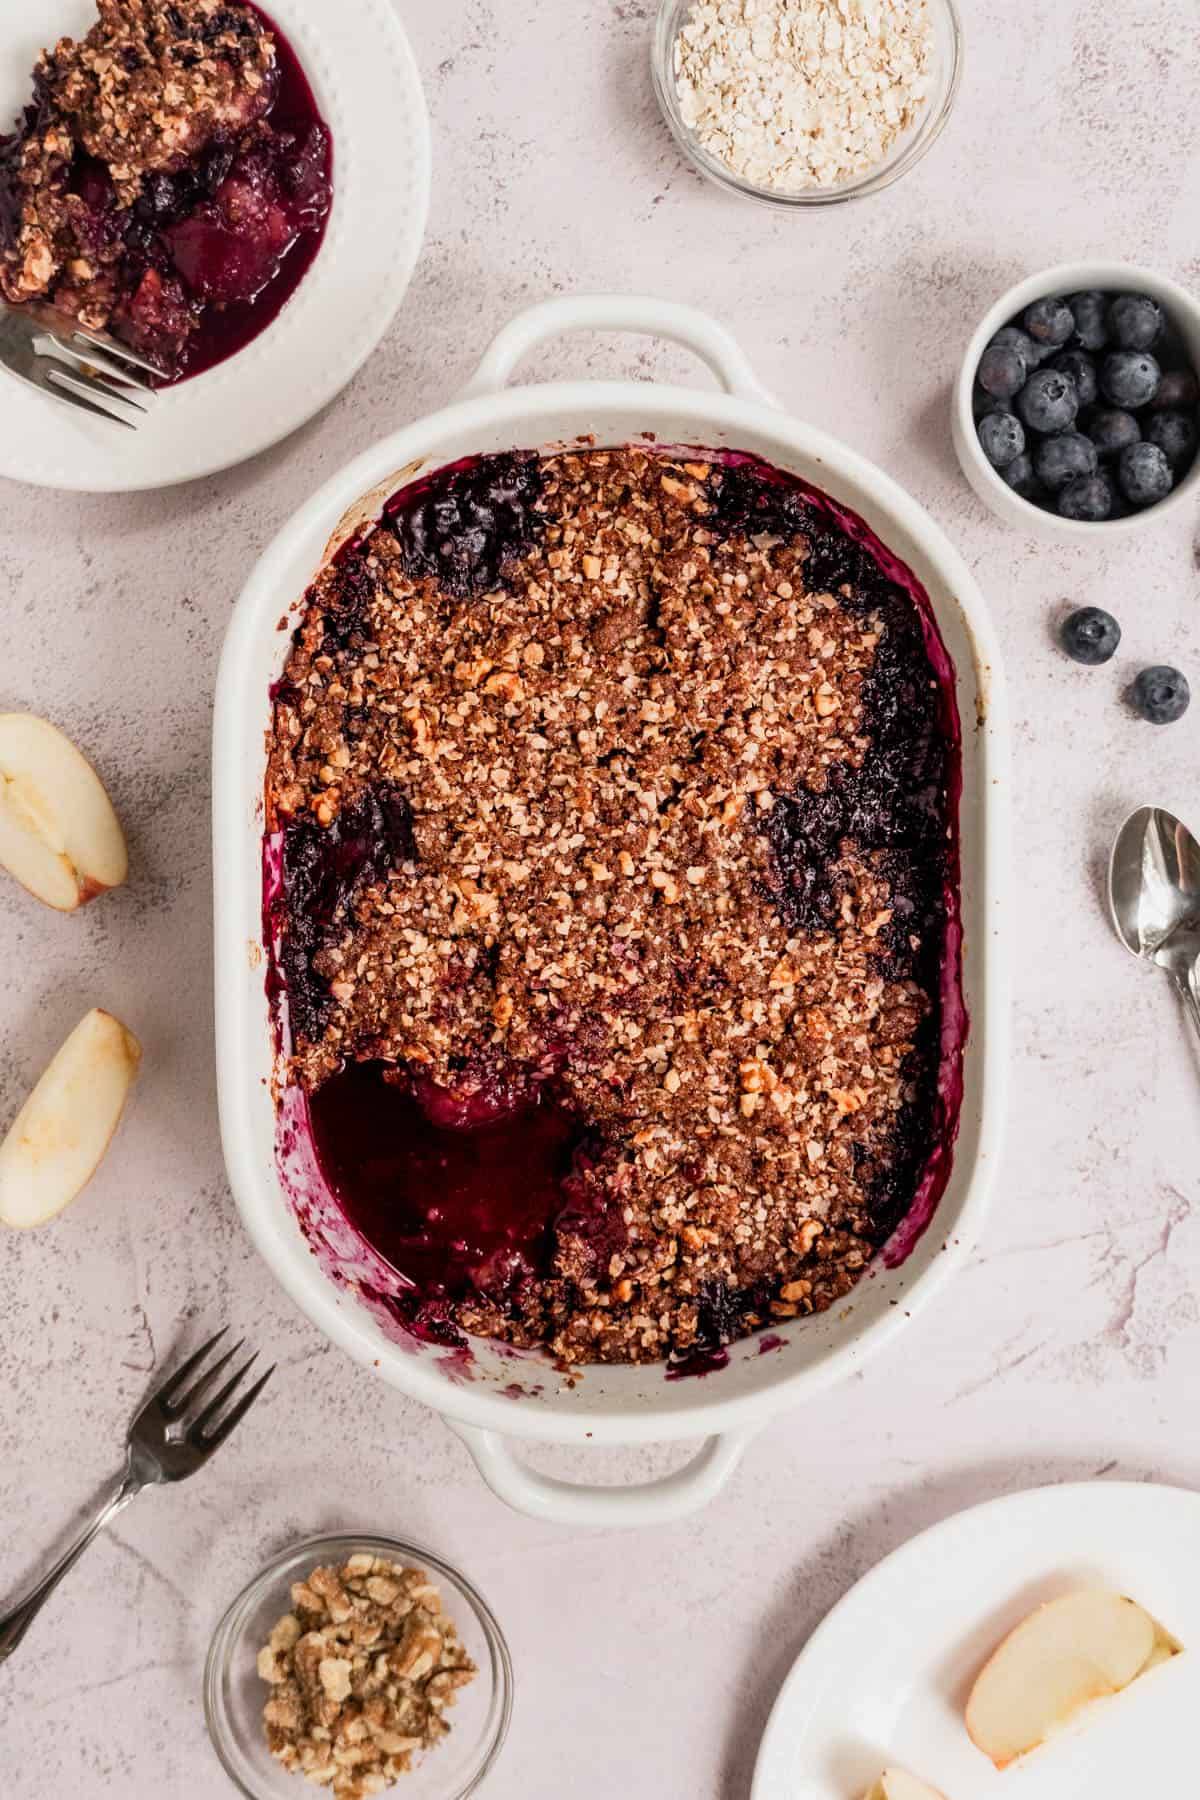 apple-and-blueberry-crumble-in-baking-pan.